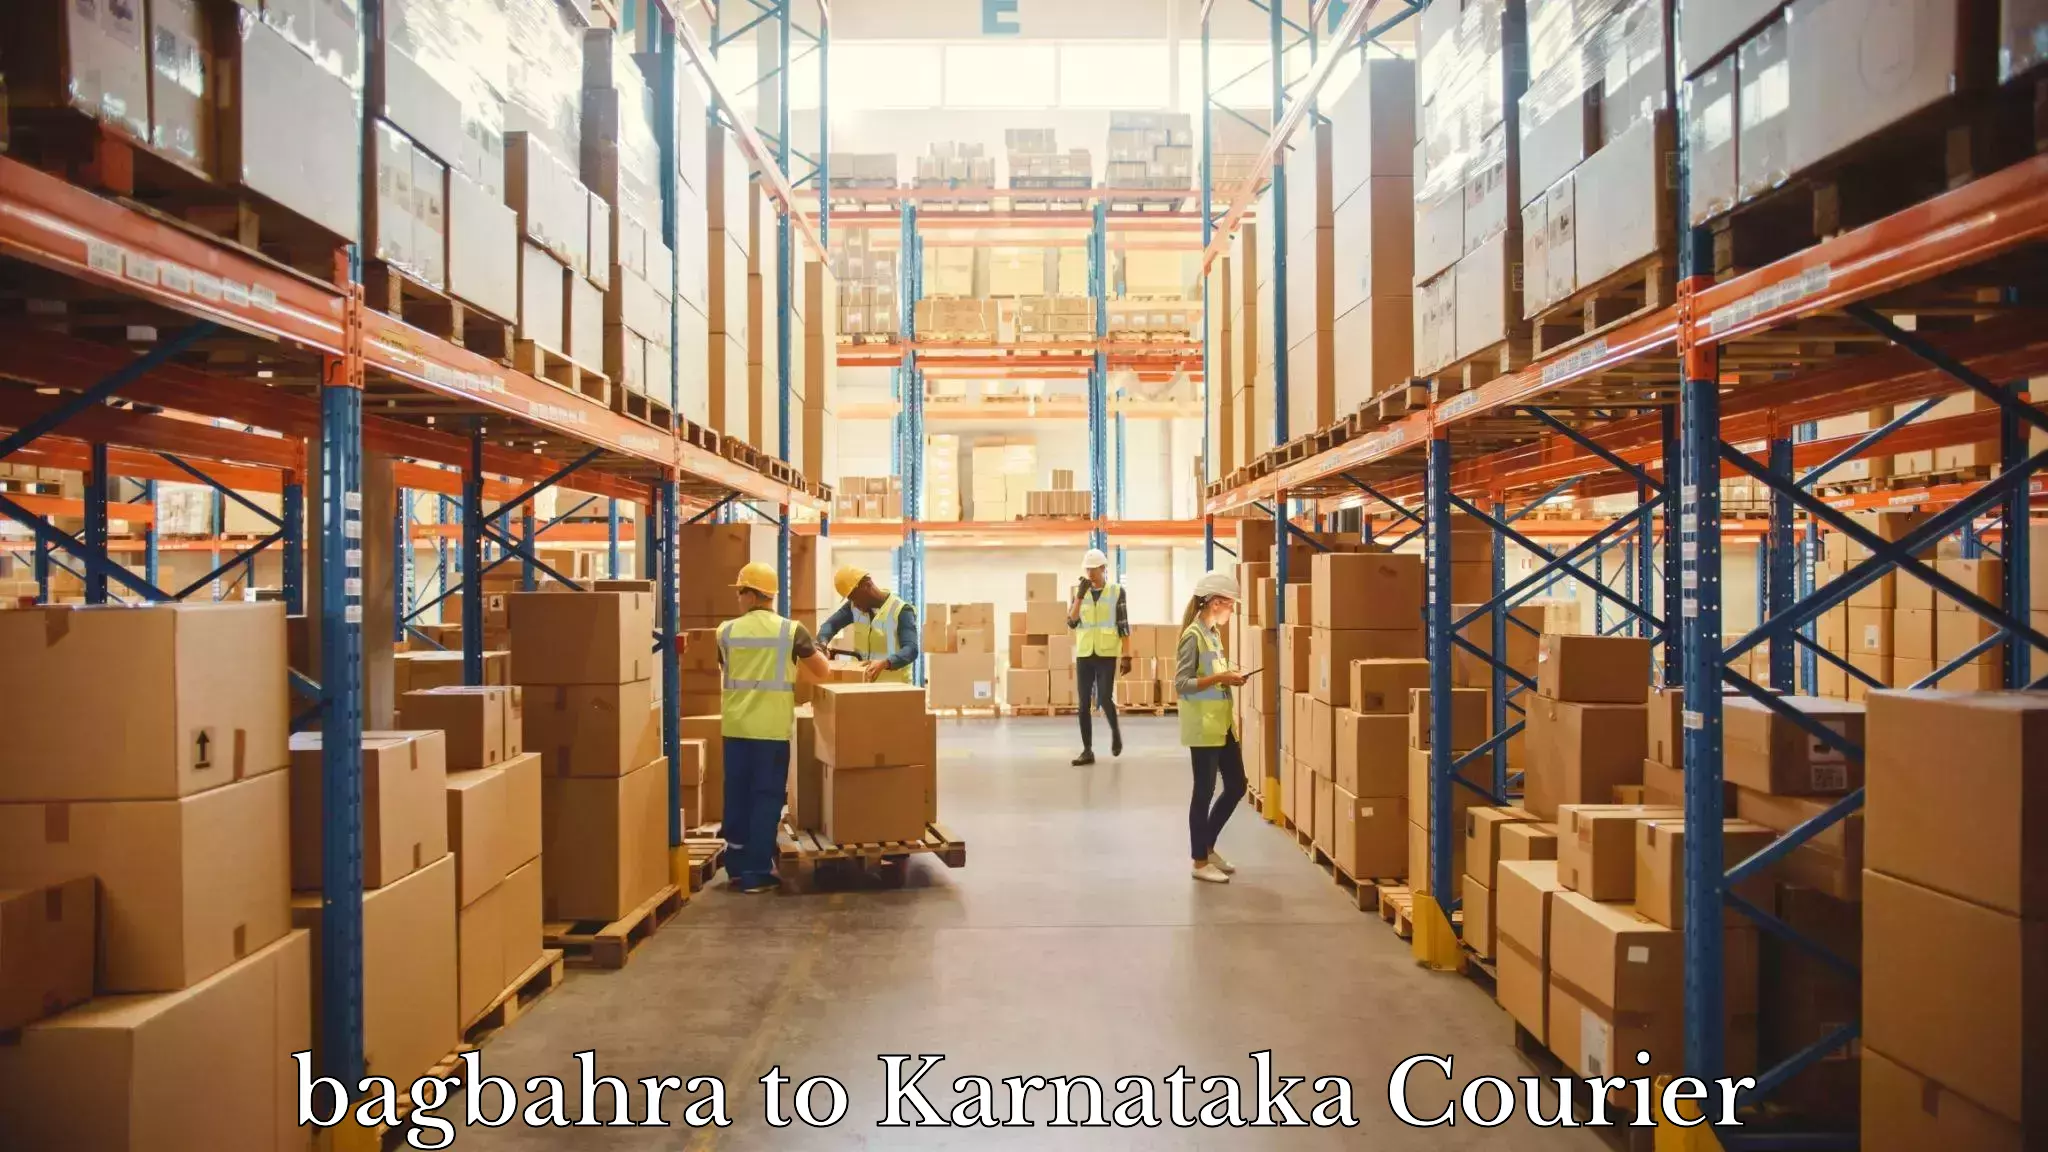 Courier service innovation bagbahra to Mangalore Port